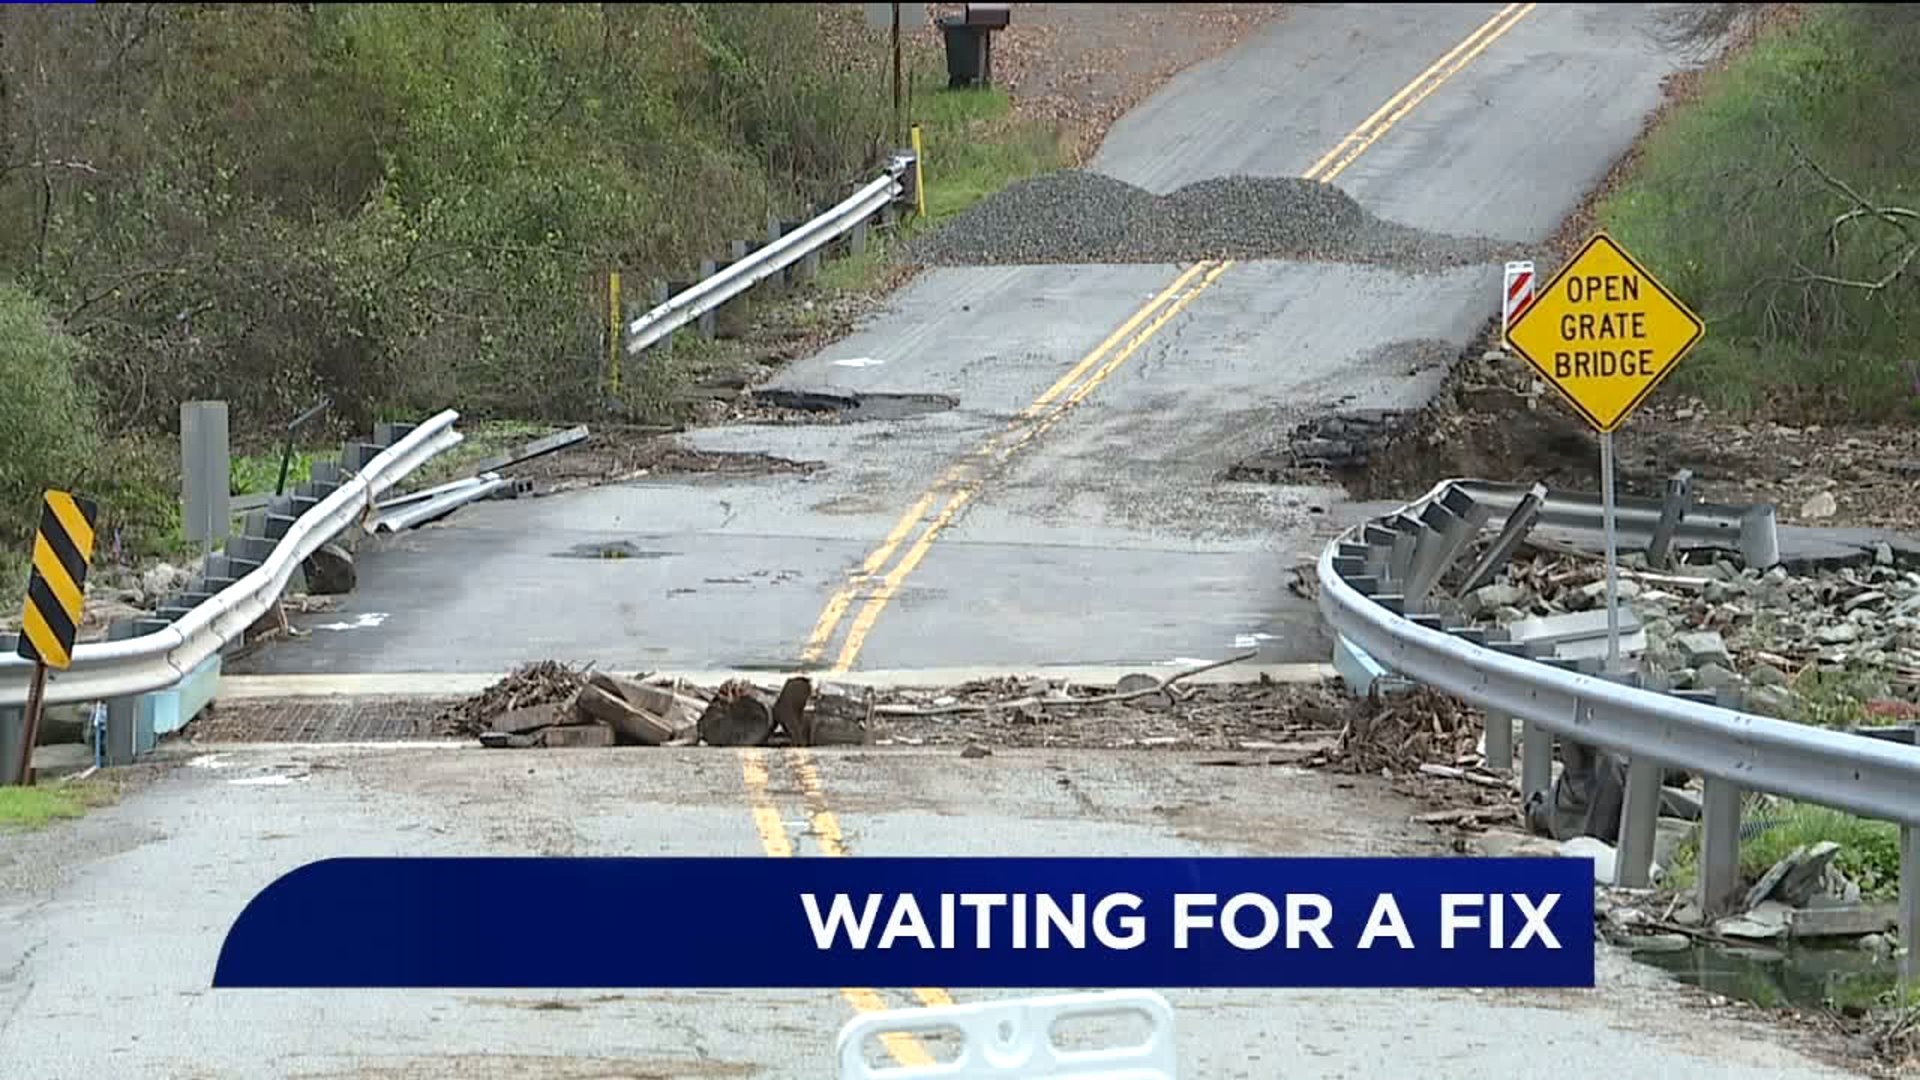 People Will Have to Keep Waiting for Fix on Flooded Bridge